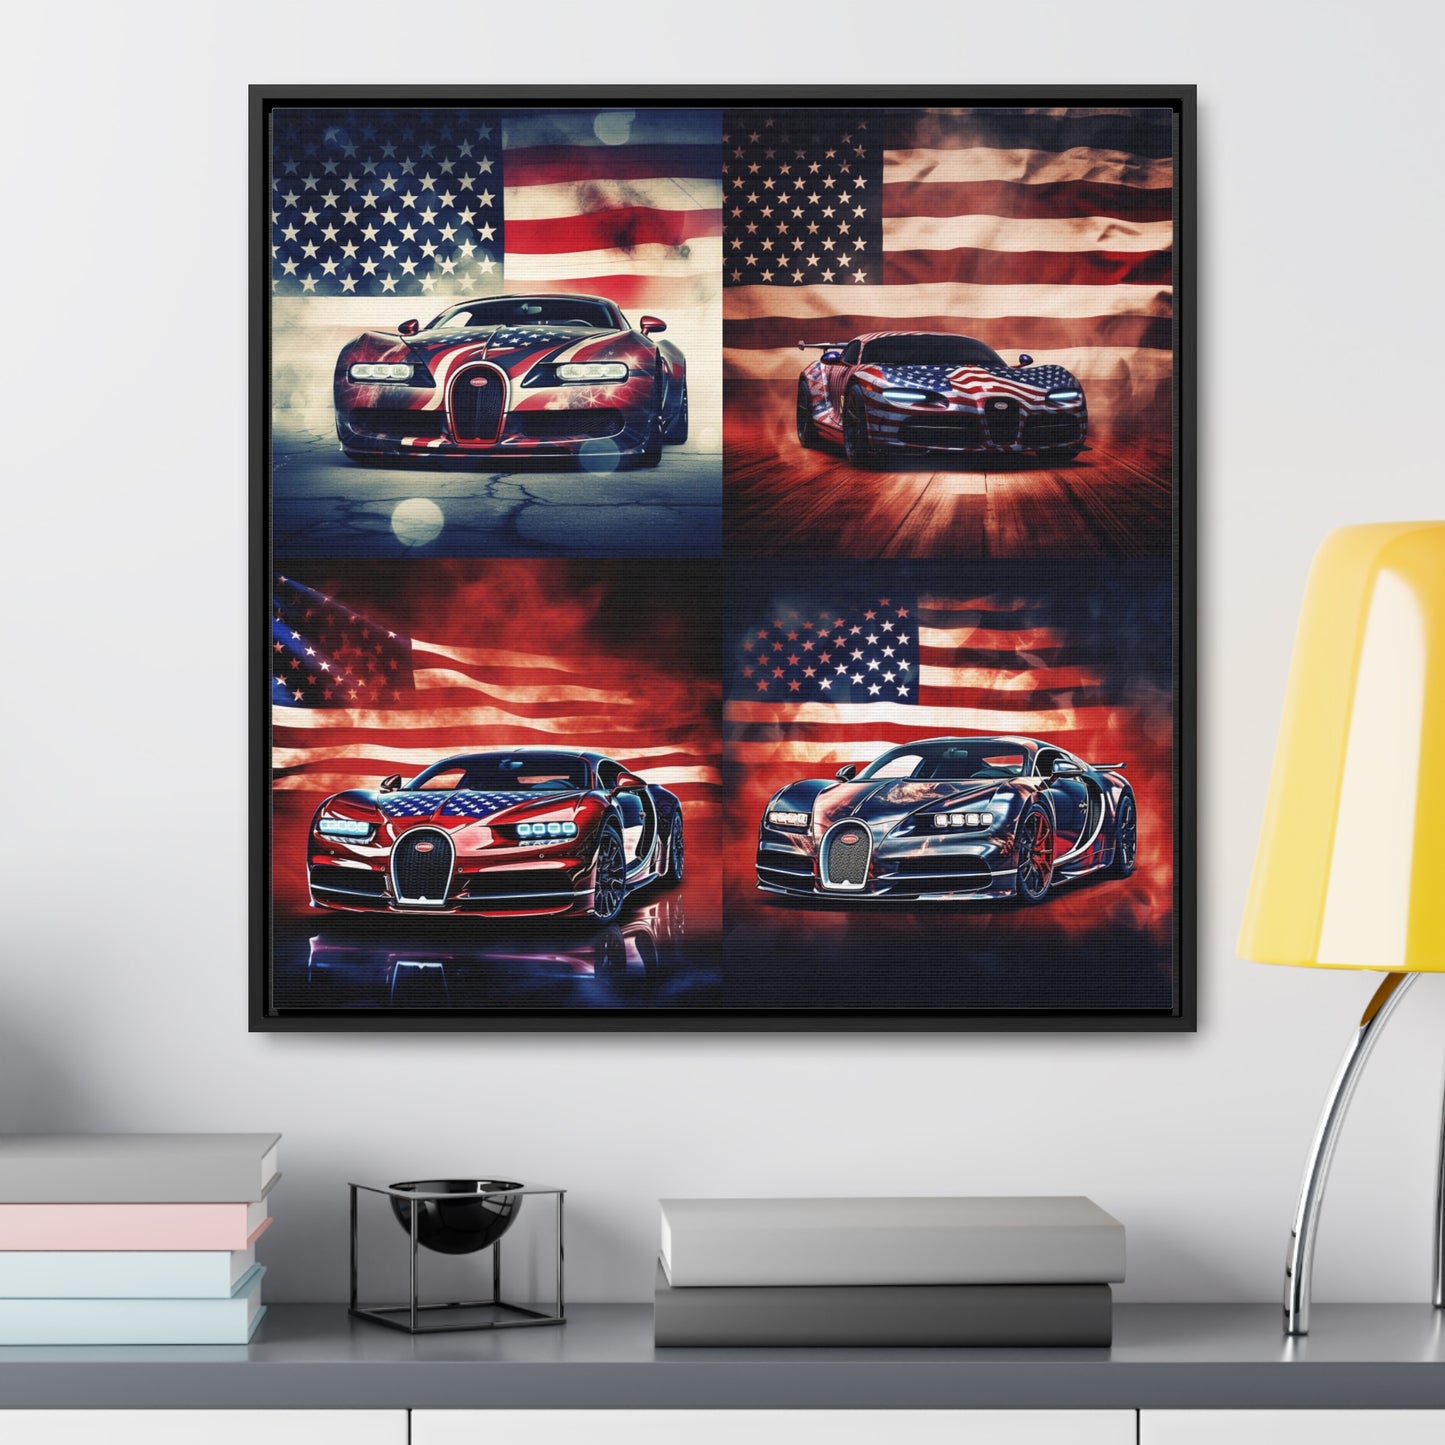 Gallery Canvas Wraps, Square Frame Abstract American Flag Background Bugatti 5